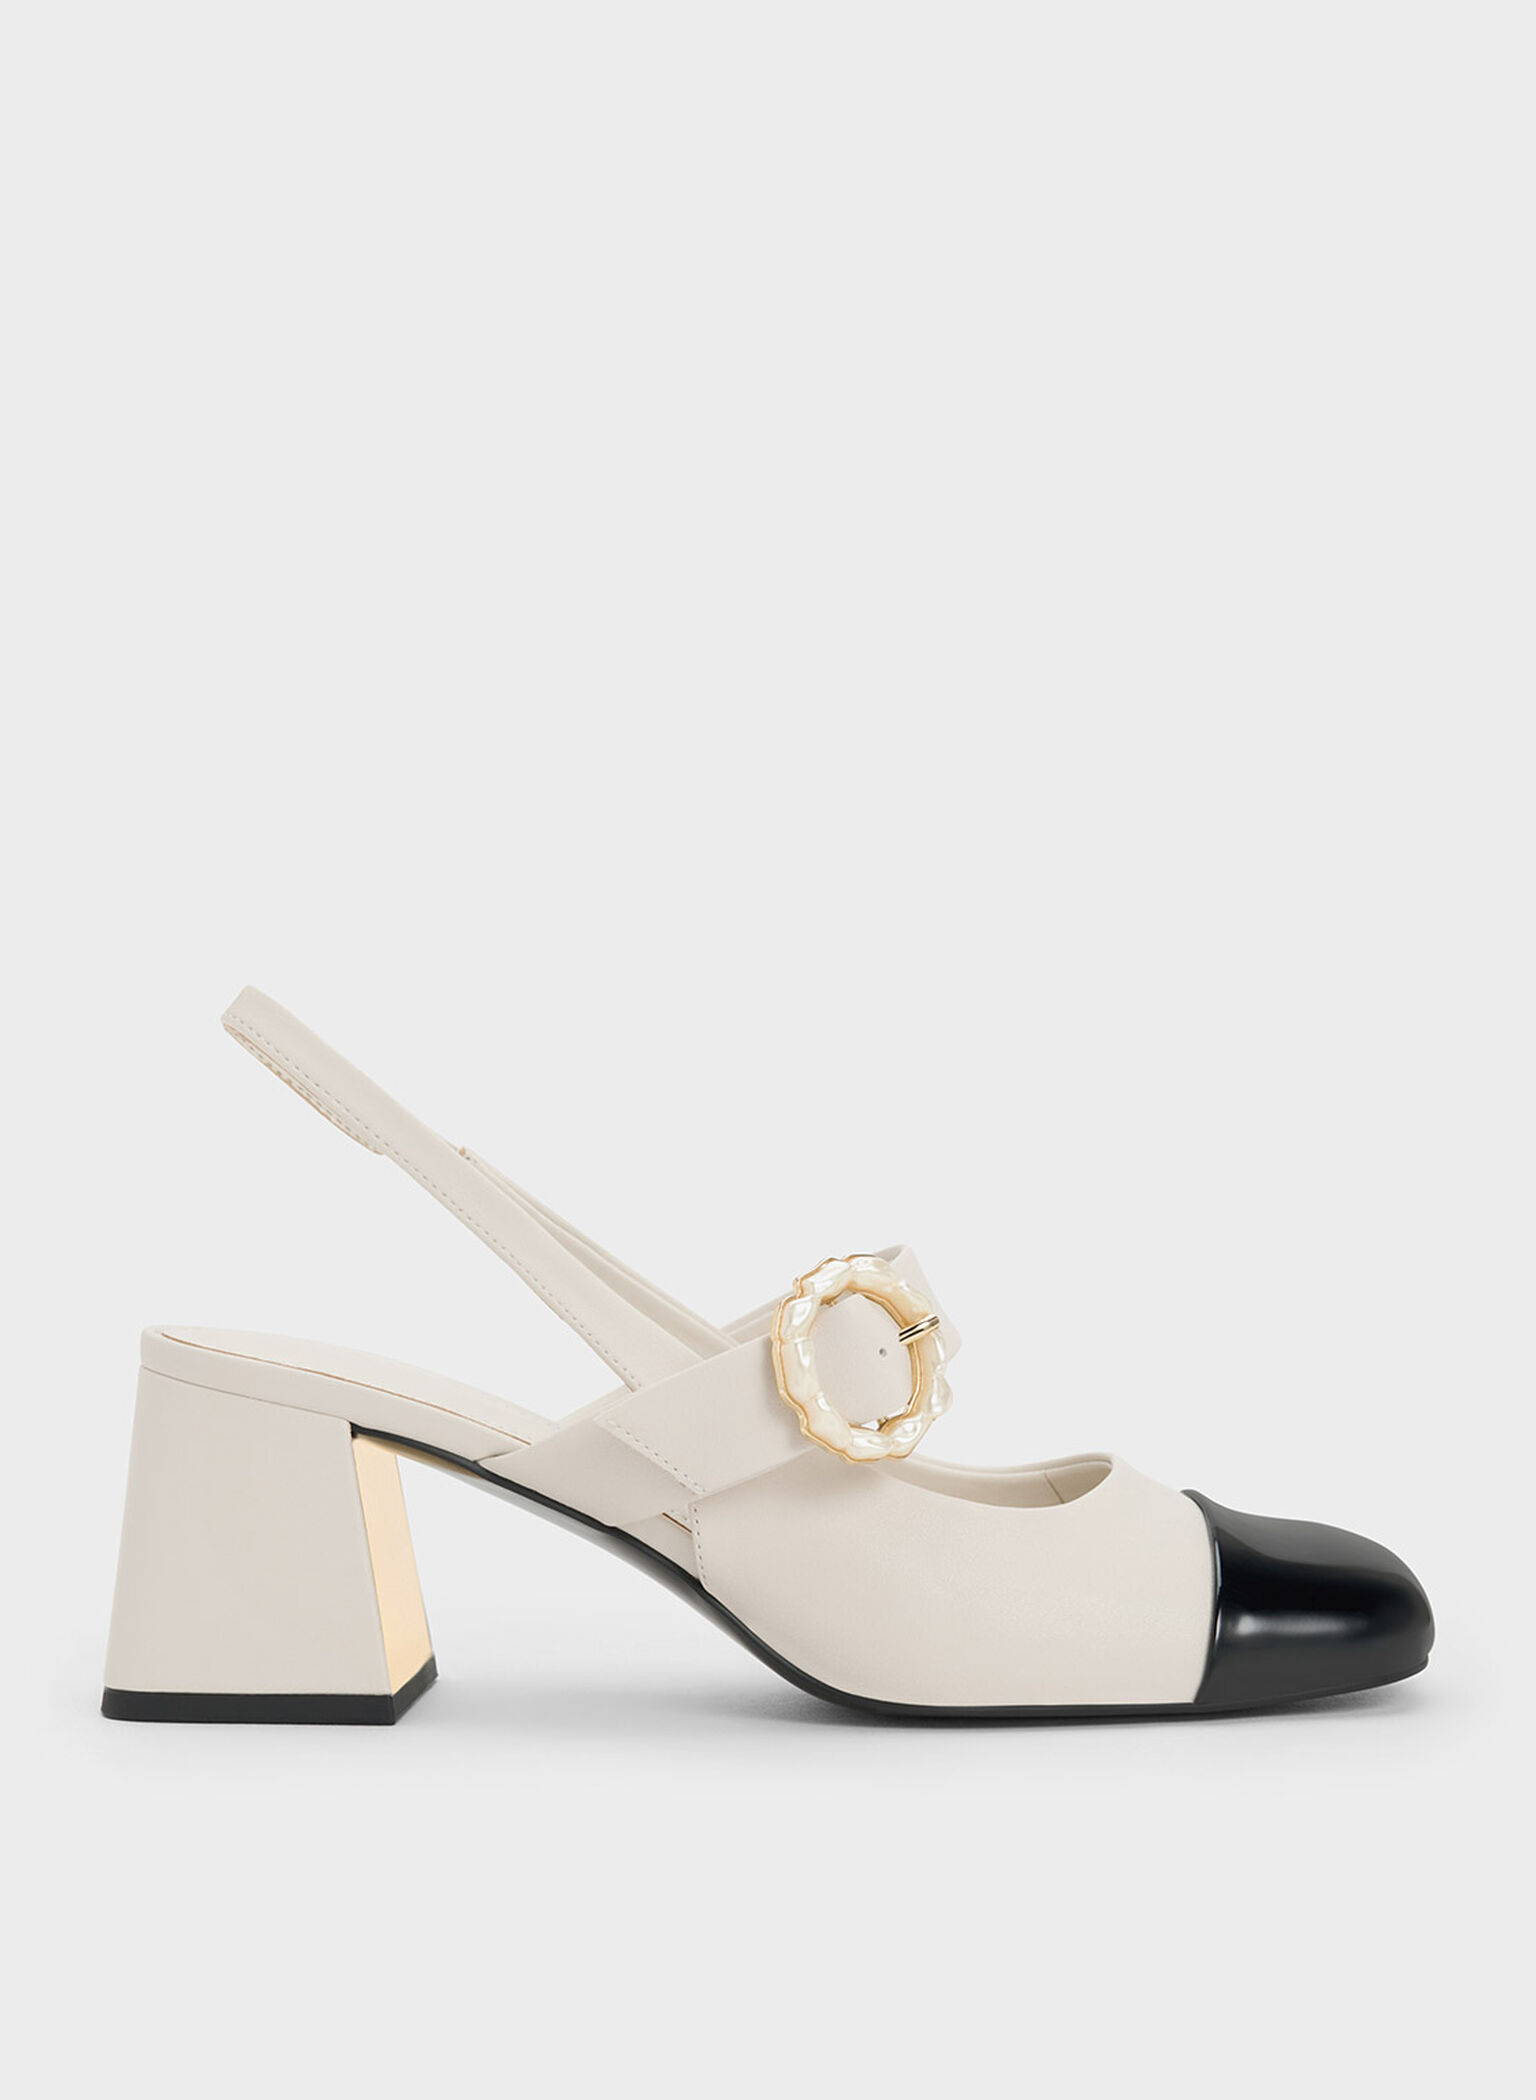 Charles & Keith Women's Pearl Buckle Slingback Pumps